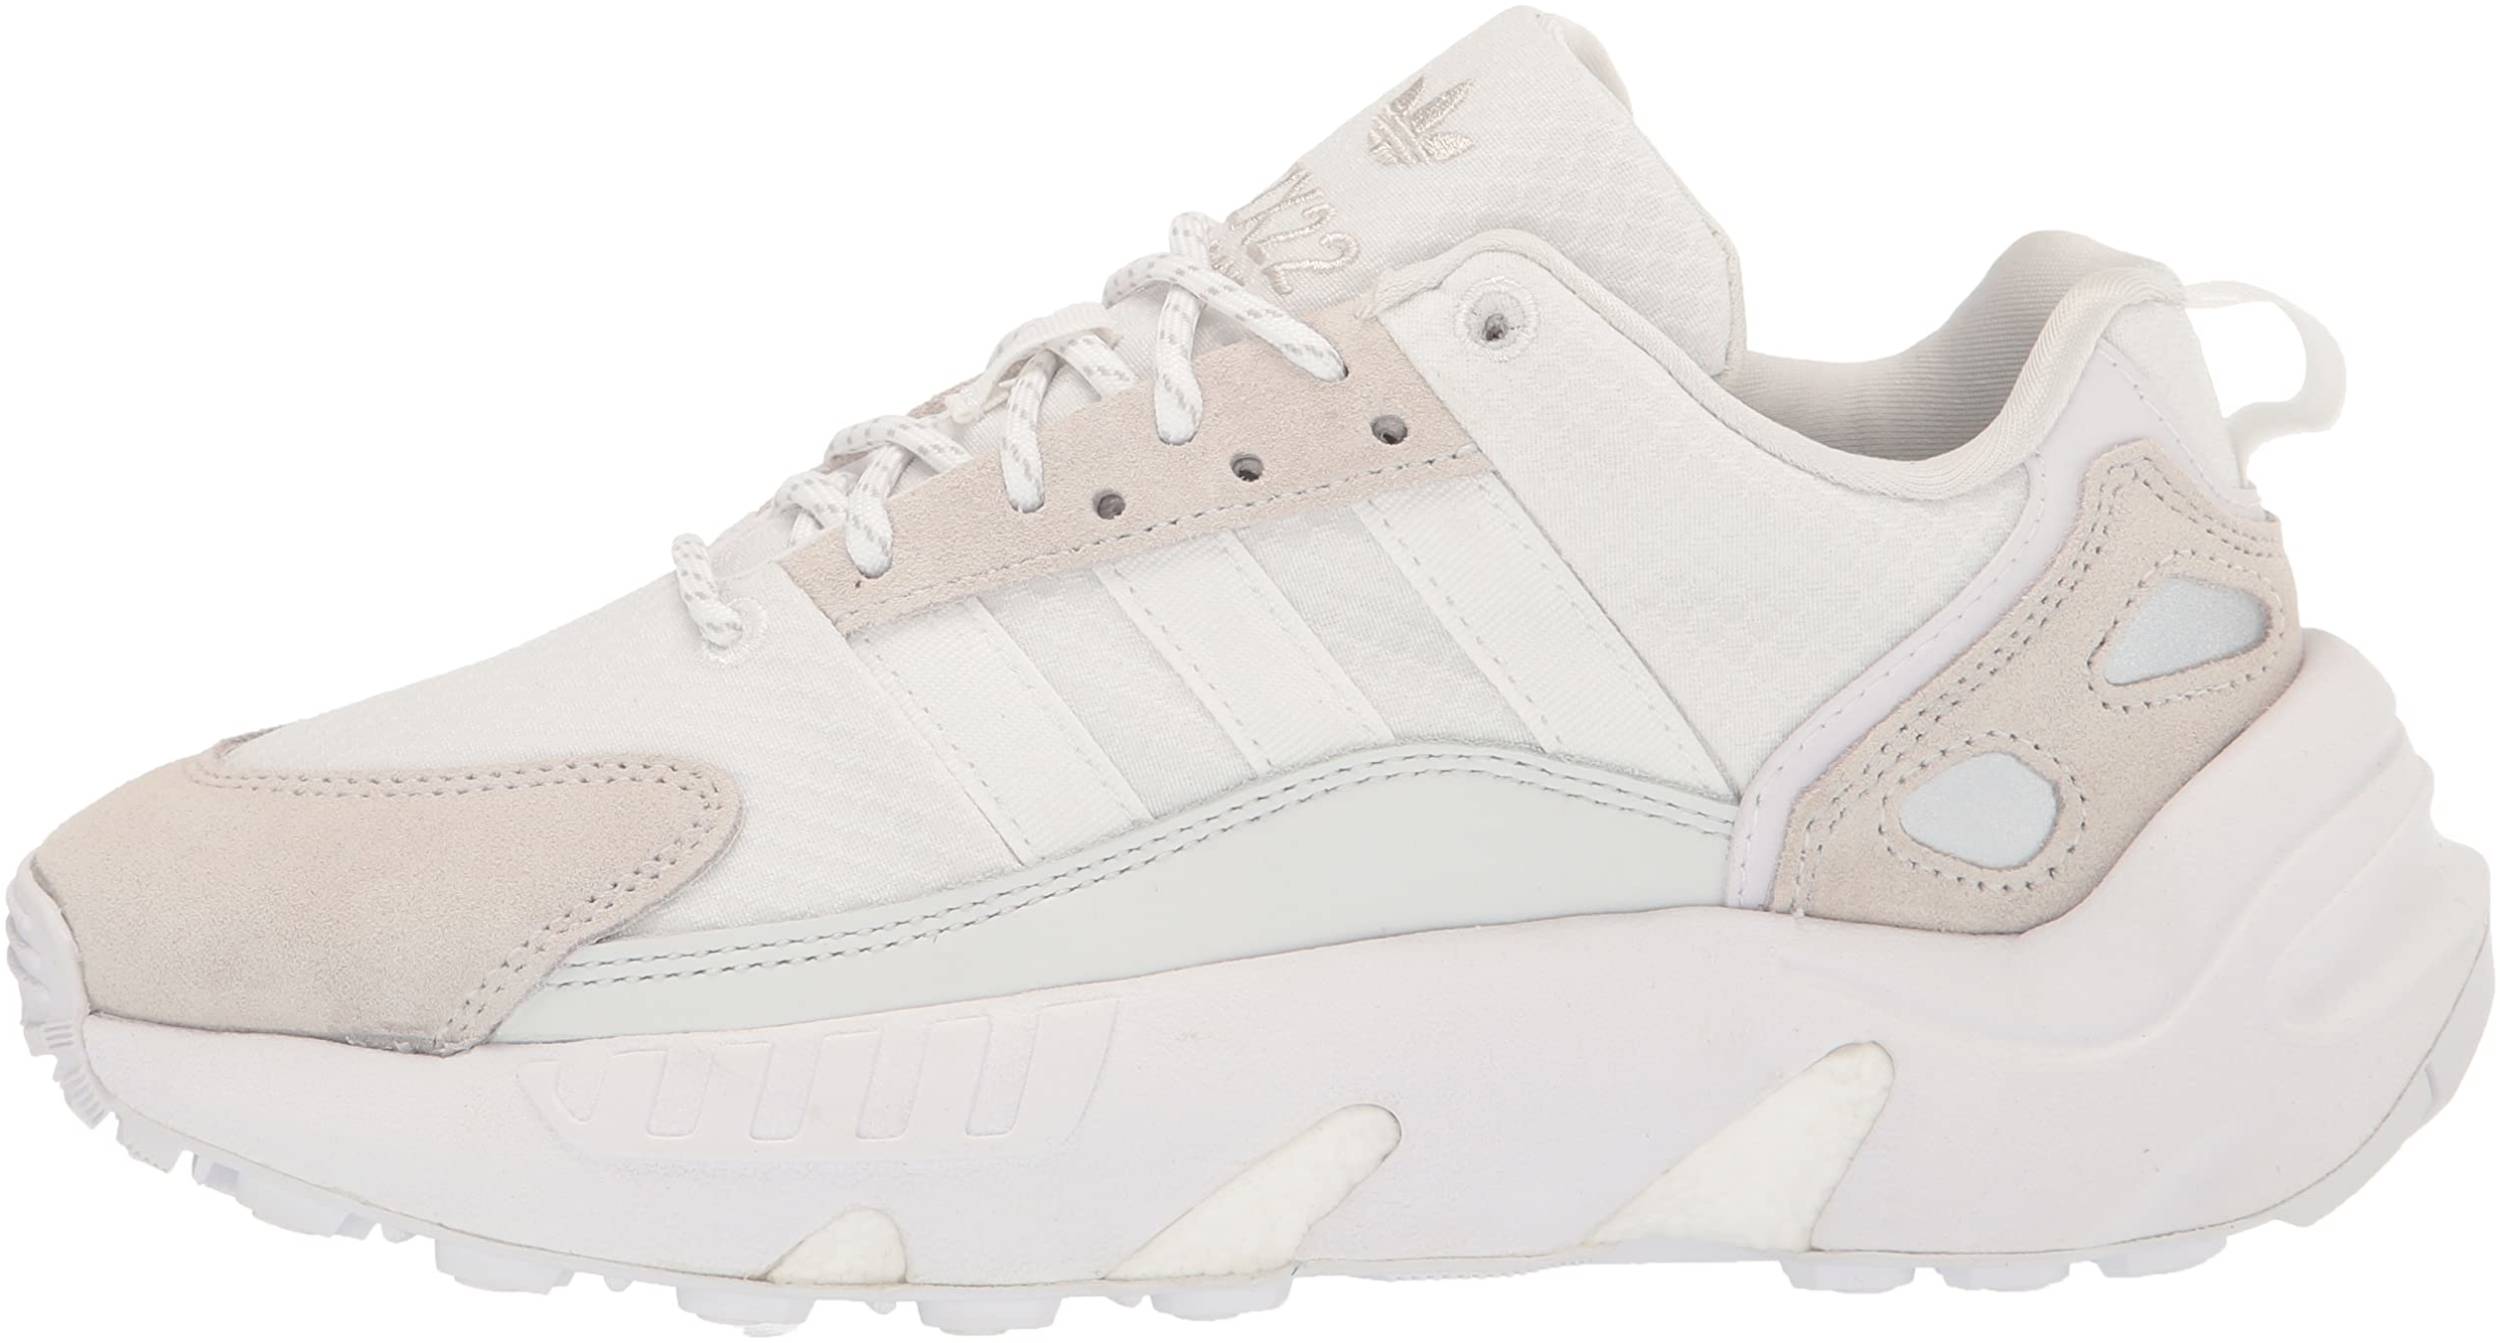 20+ Adidas ZX sneakers: Save up to 51% | RunRepeat